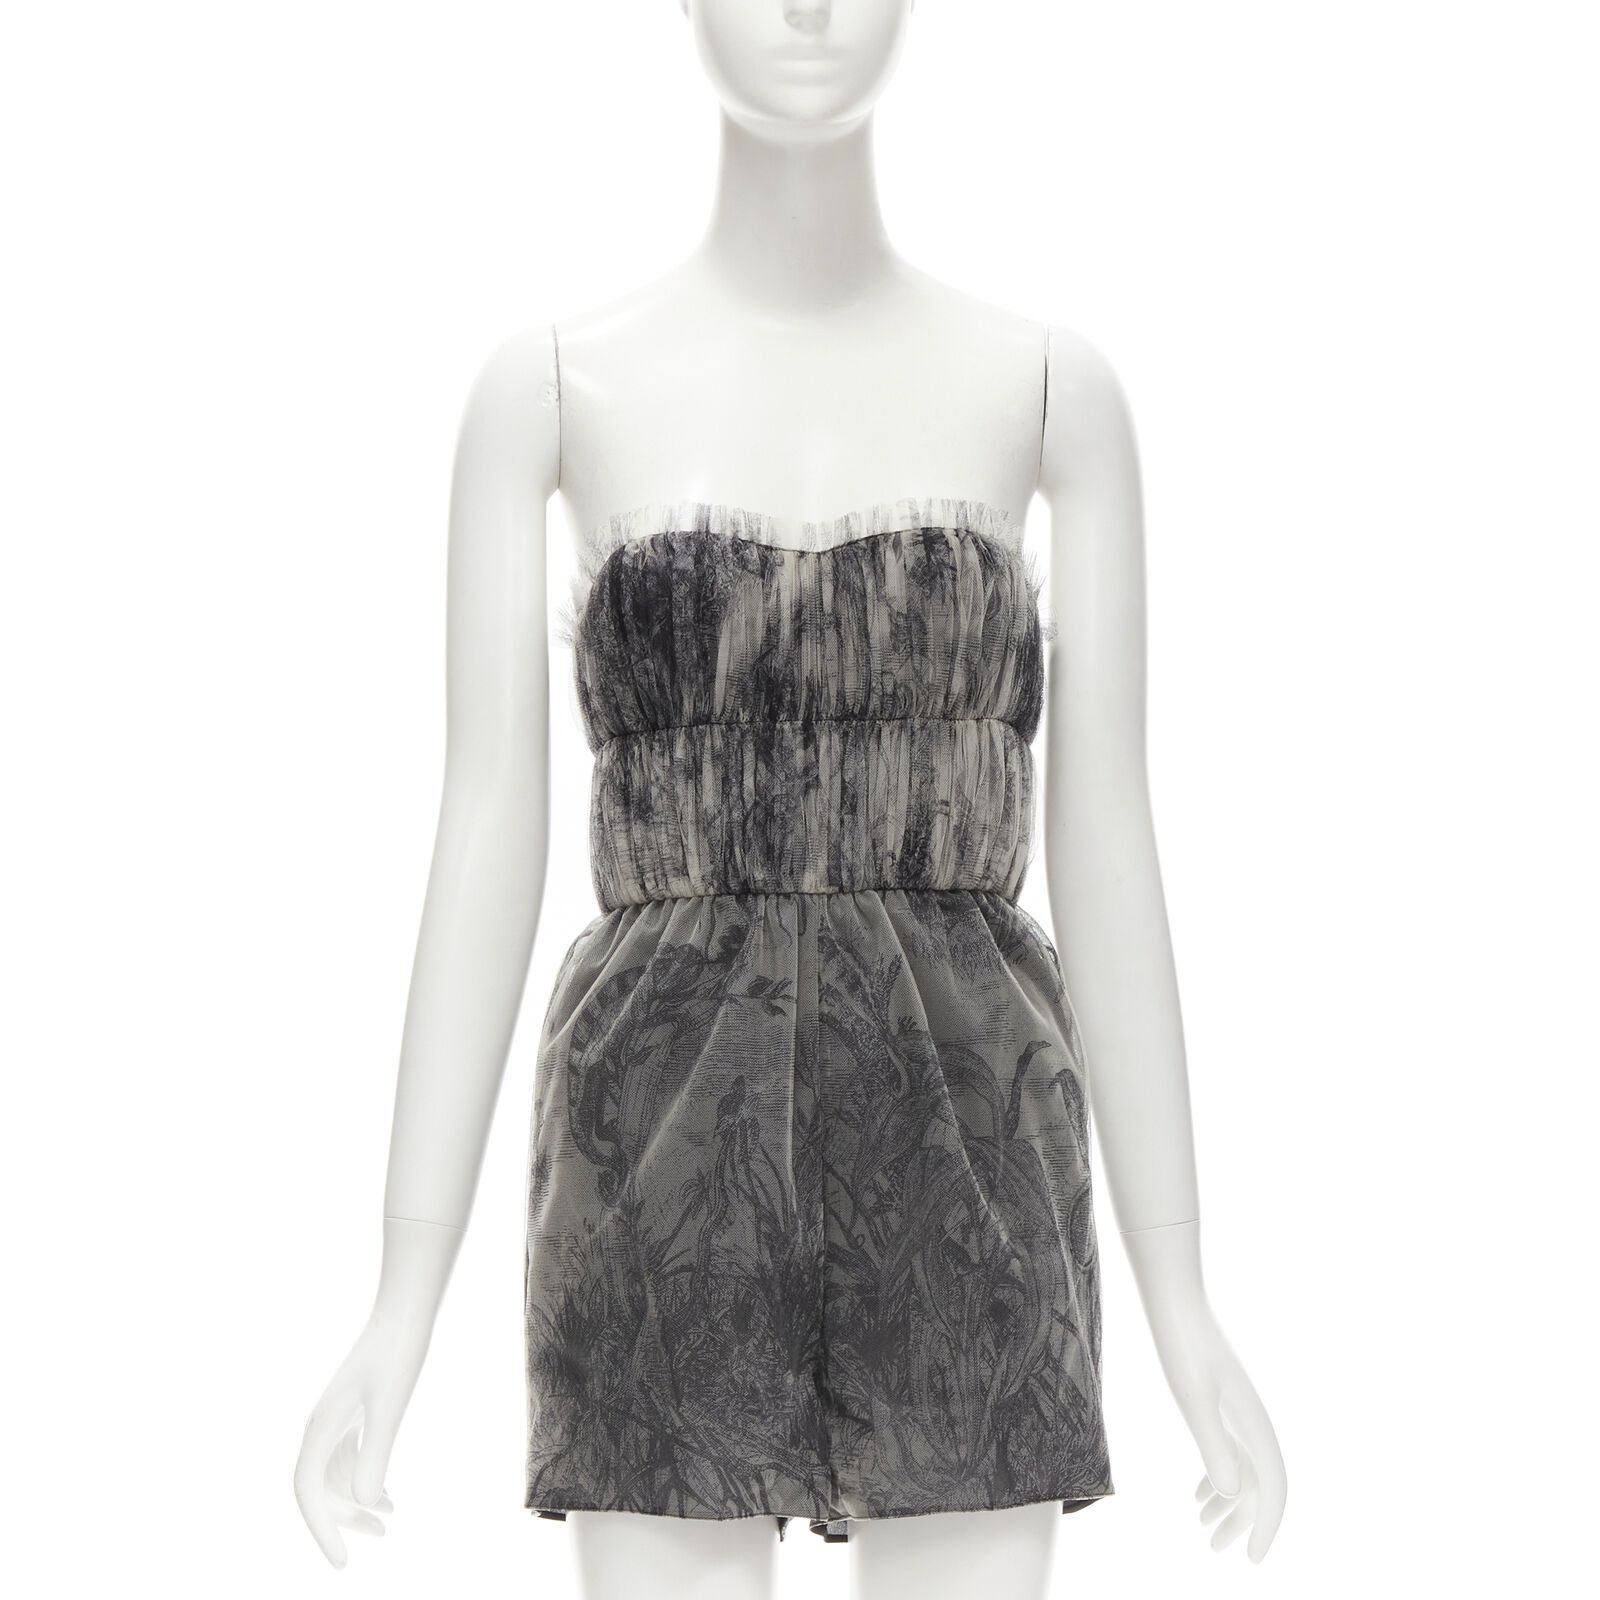 Dior new CHRISTIAN DIOR Fantaisie Dioriviera tulle gathered pleated romper FR34 XS Size 26" / US 2 / IT 38 - 1 Preview